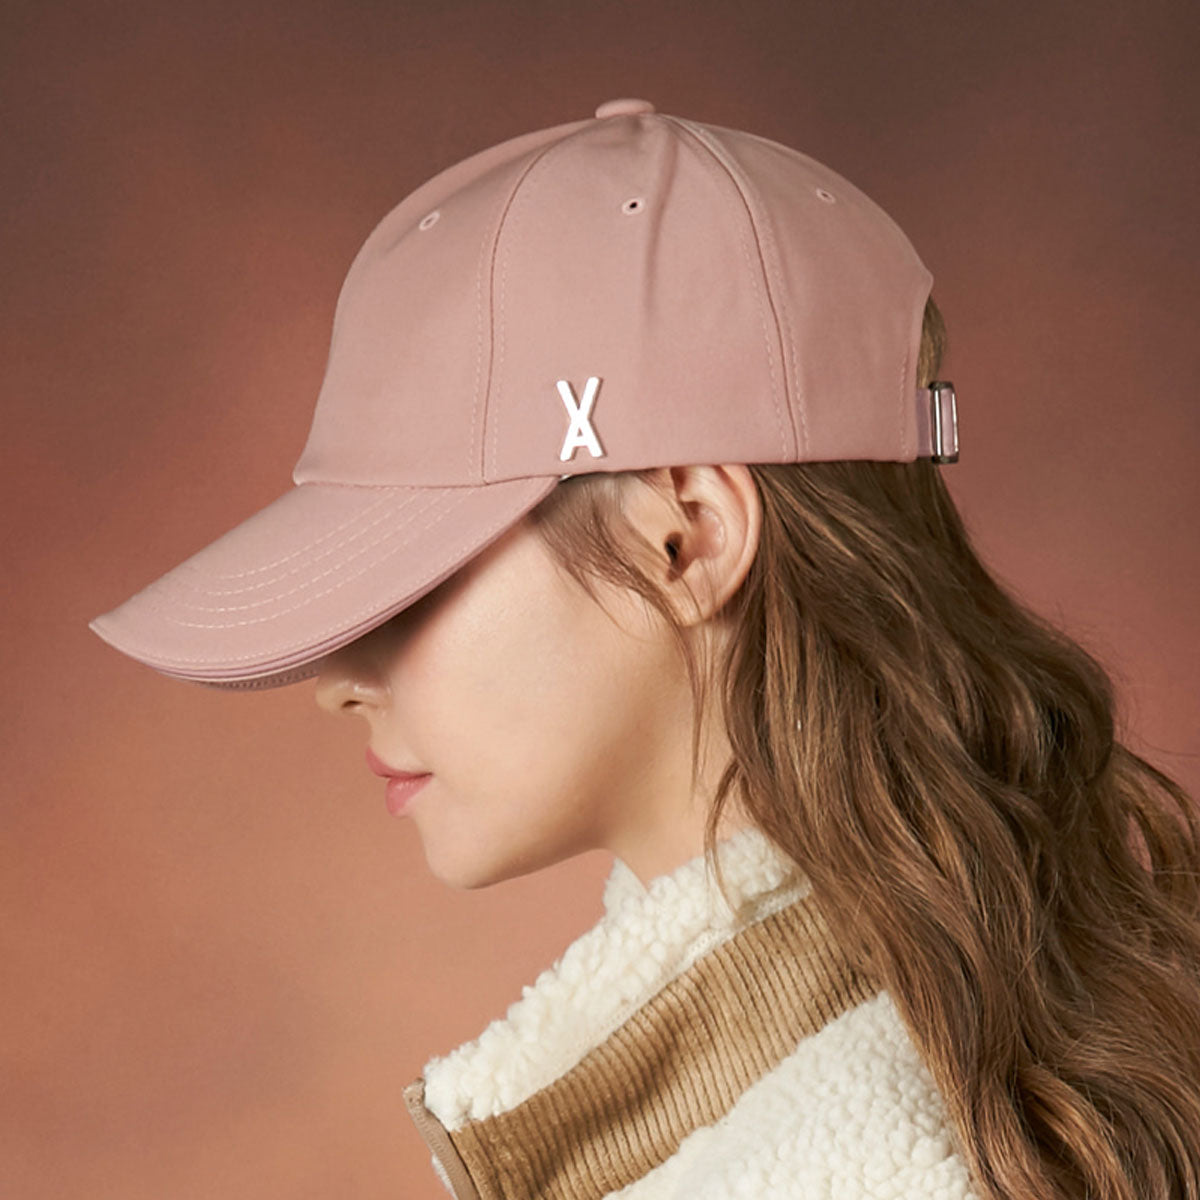 VARZAR - SILVER STUD OVER FIT BALL CAP PINK【VZR4-0006】